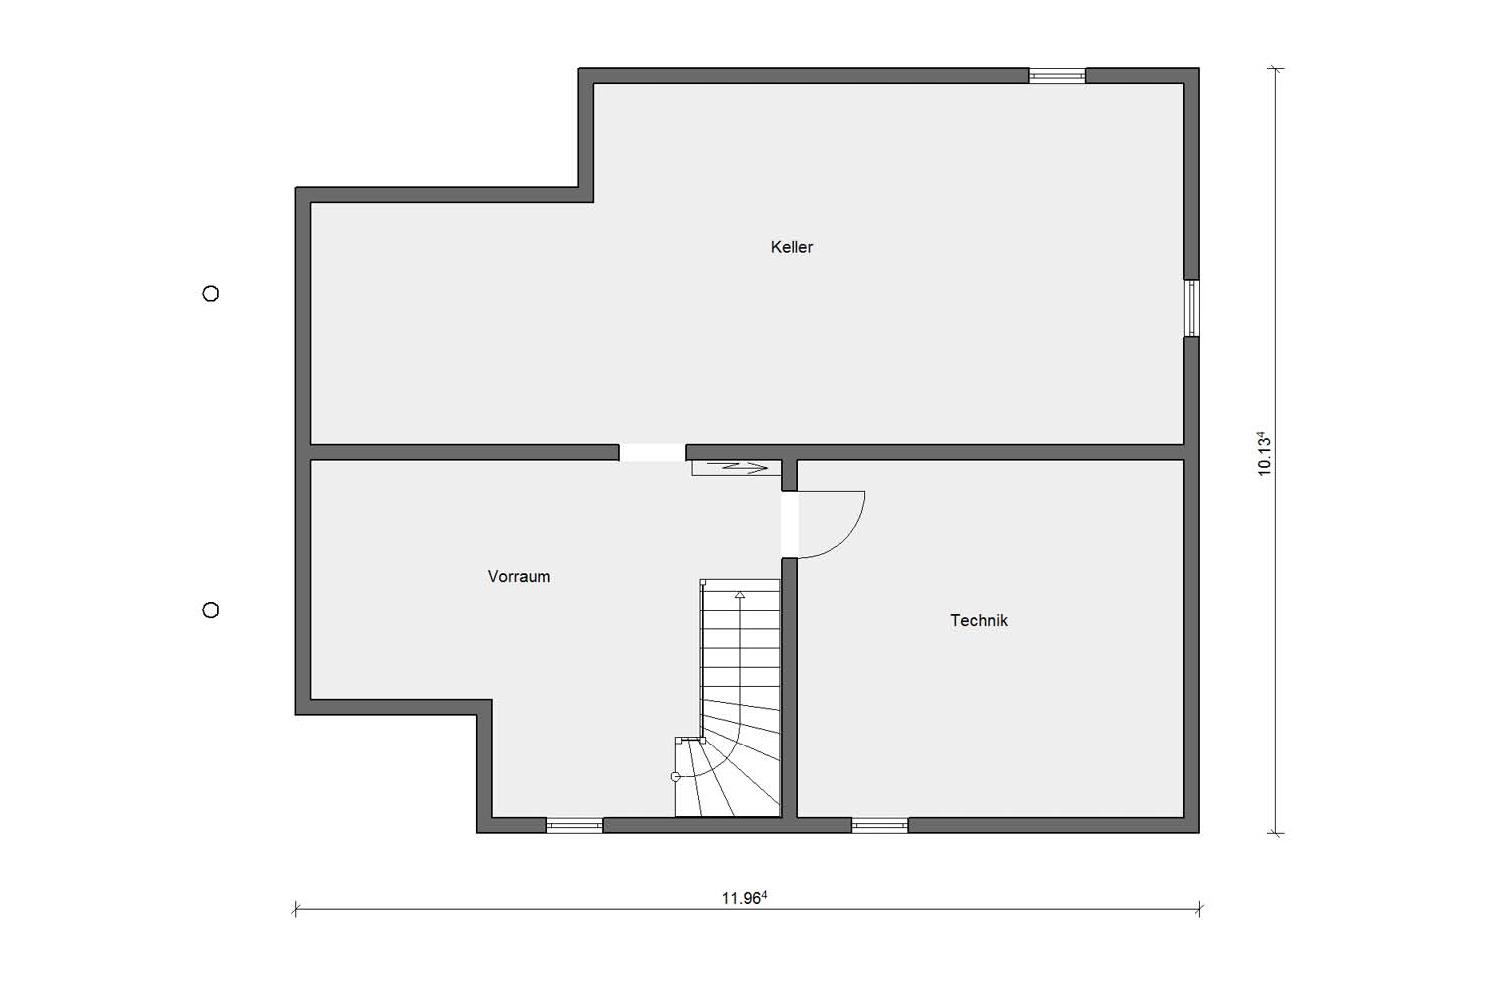 Floor plan basement E 15-205.1 House with conservatory